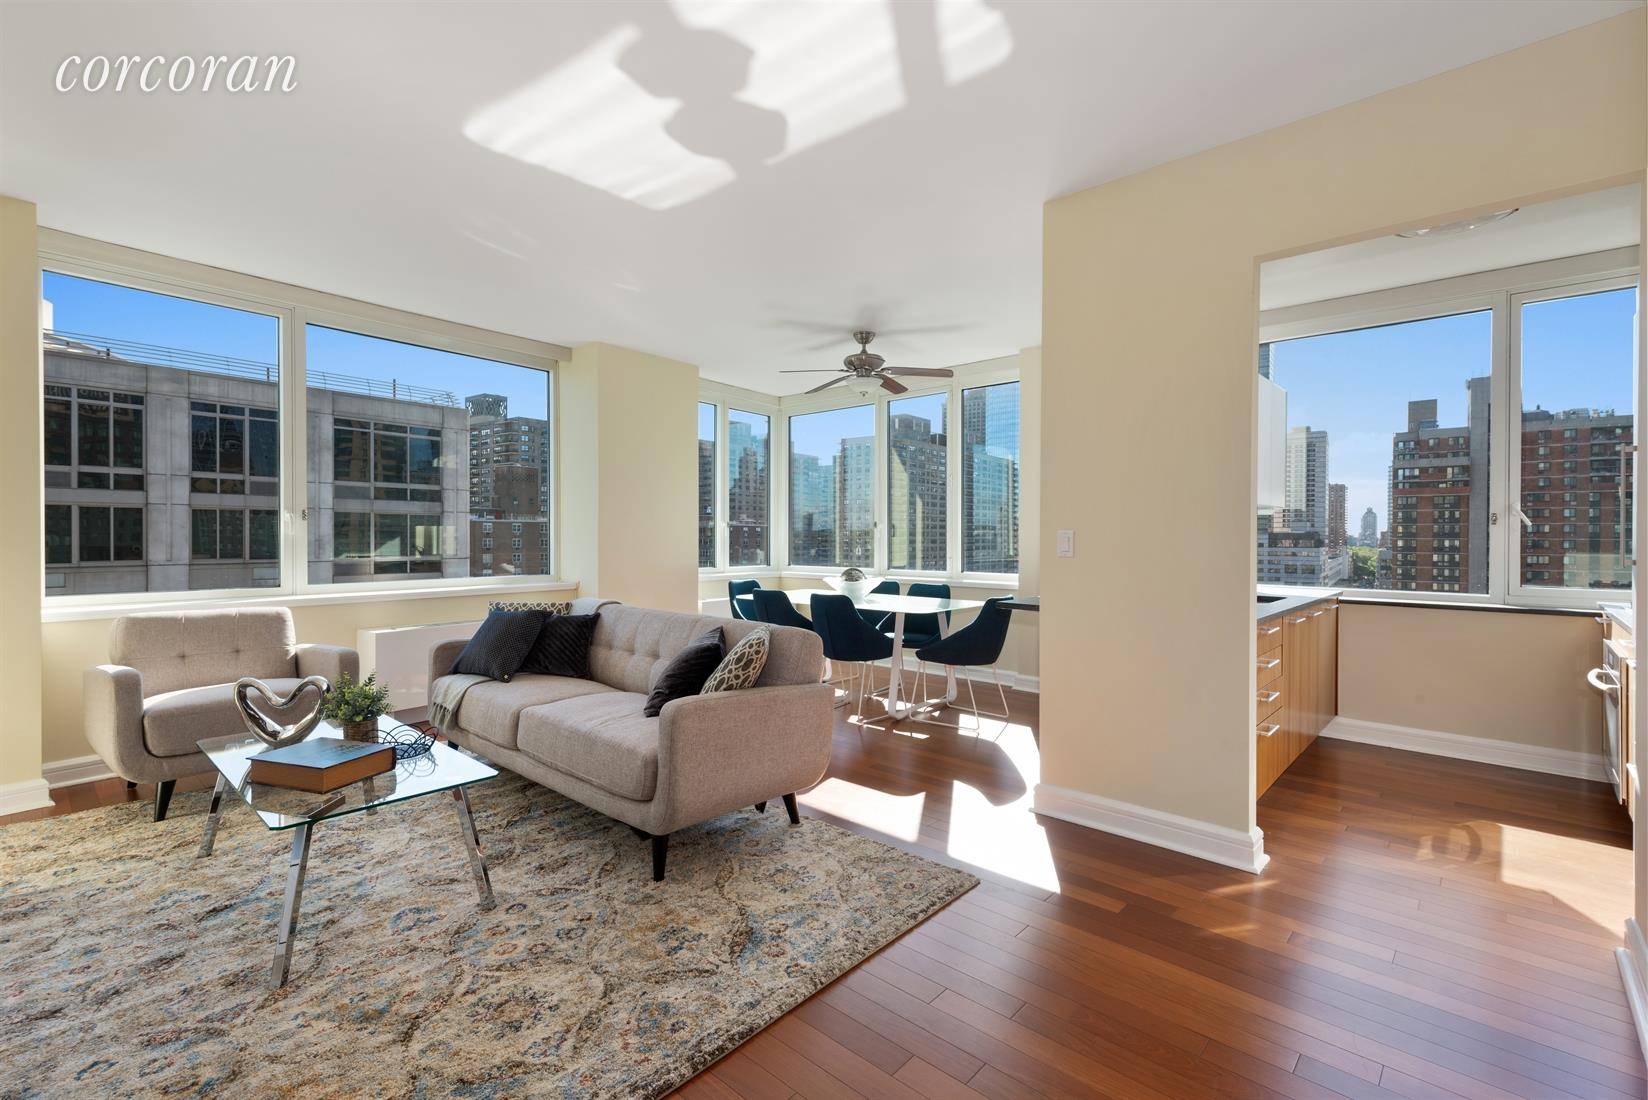 Enjoy stunning views of the Hudson River from this high floor corner two bedroom, two bathroom apartment.